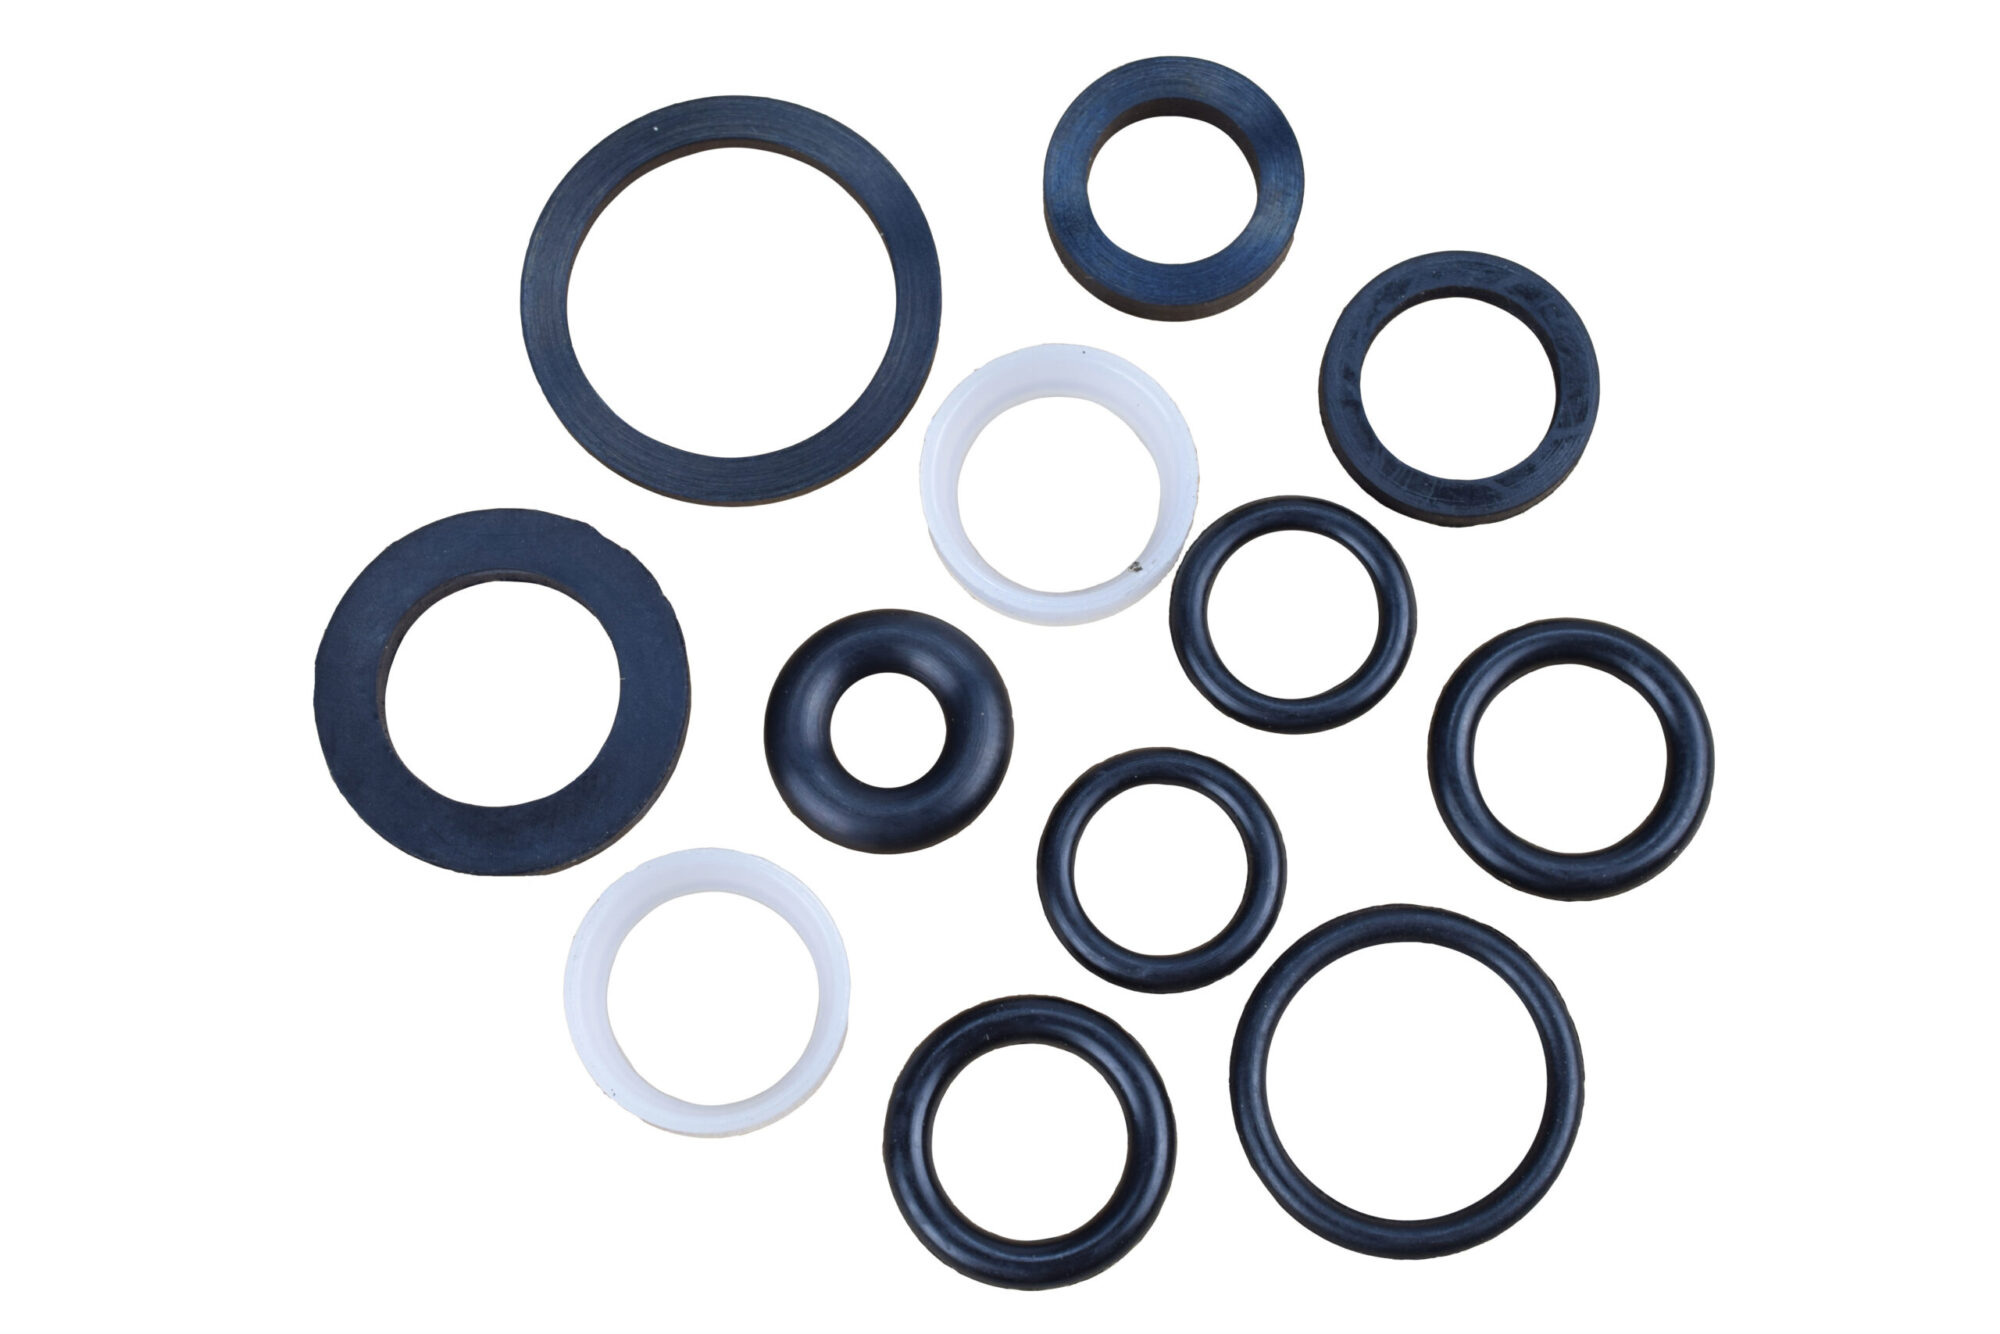 661ST-9A Replacement Gaskets for 661STF